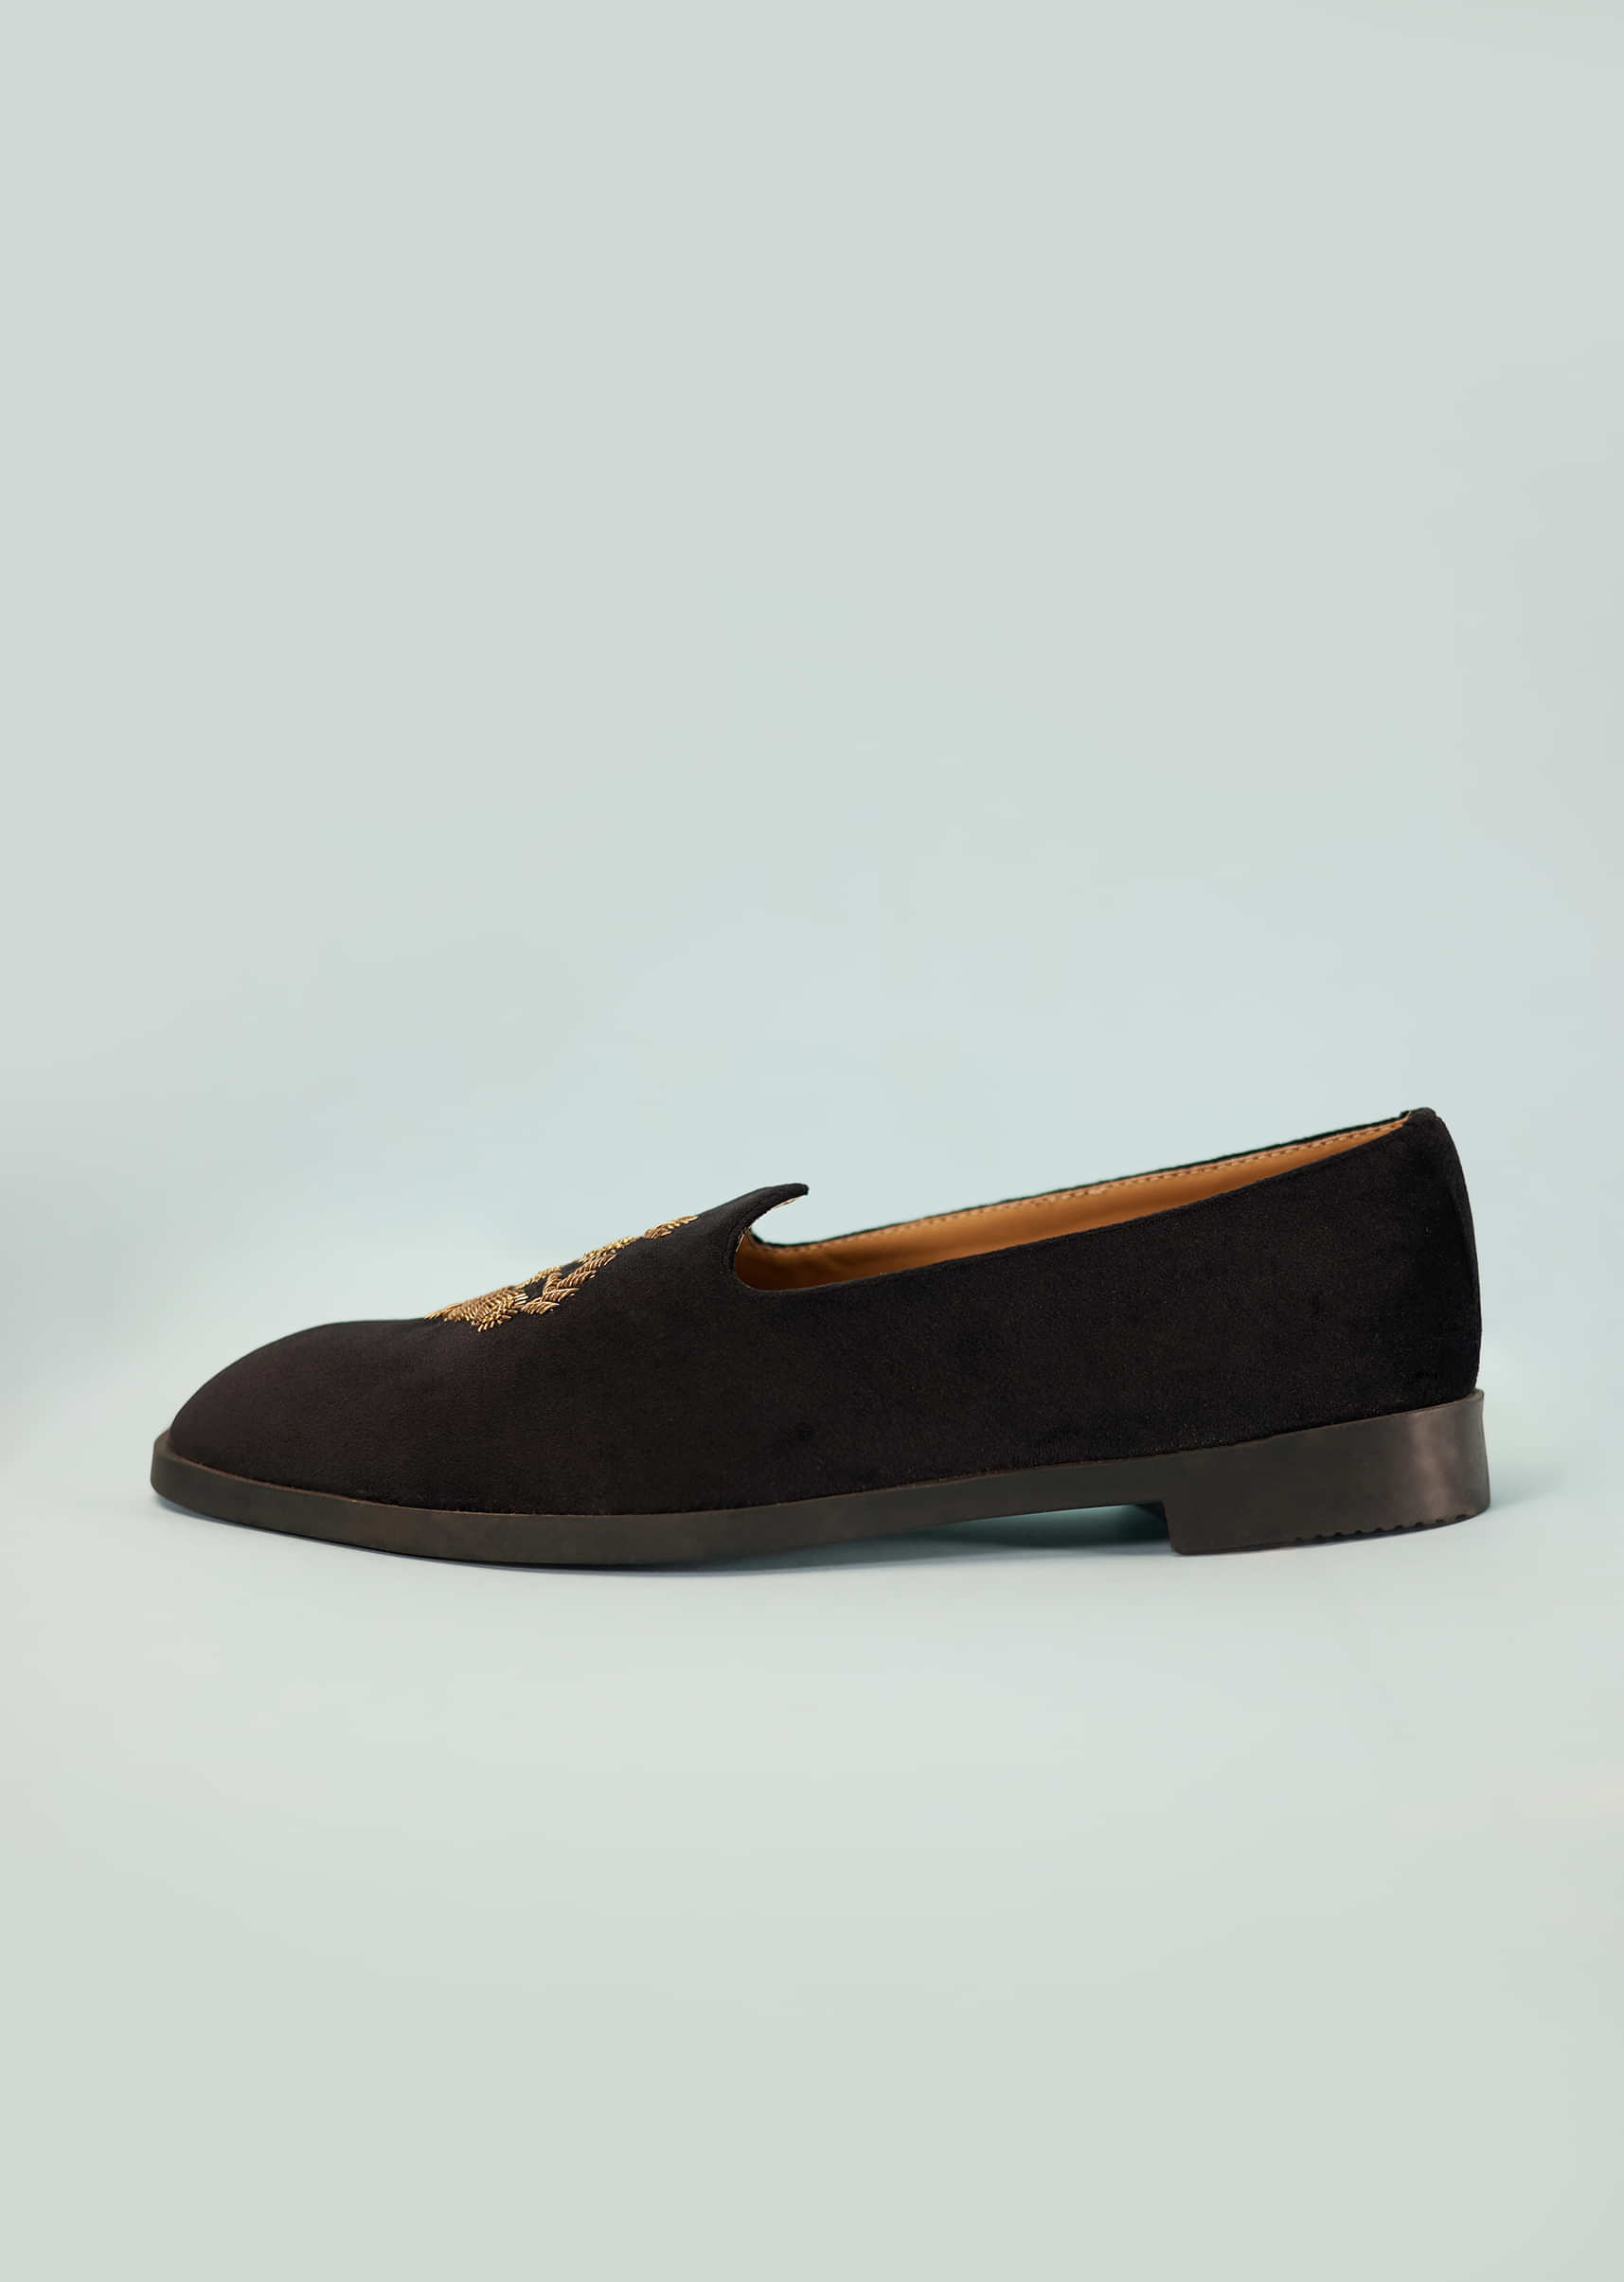 Black Mules For Men In Suede With Embroidery